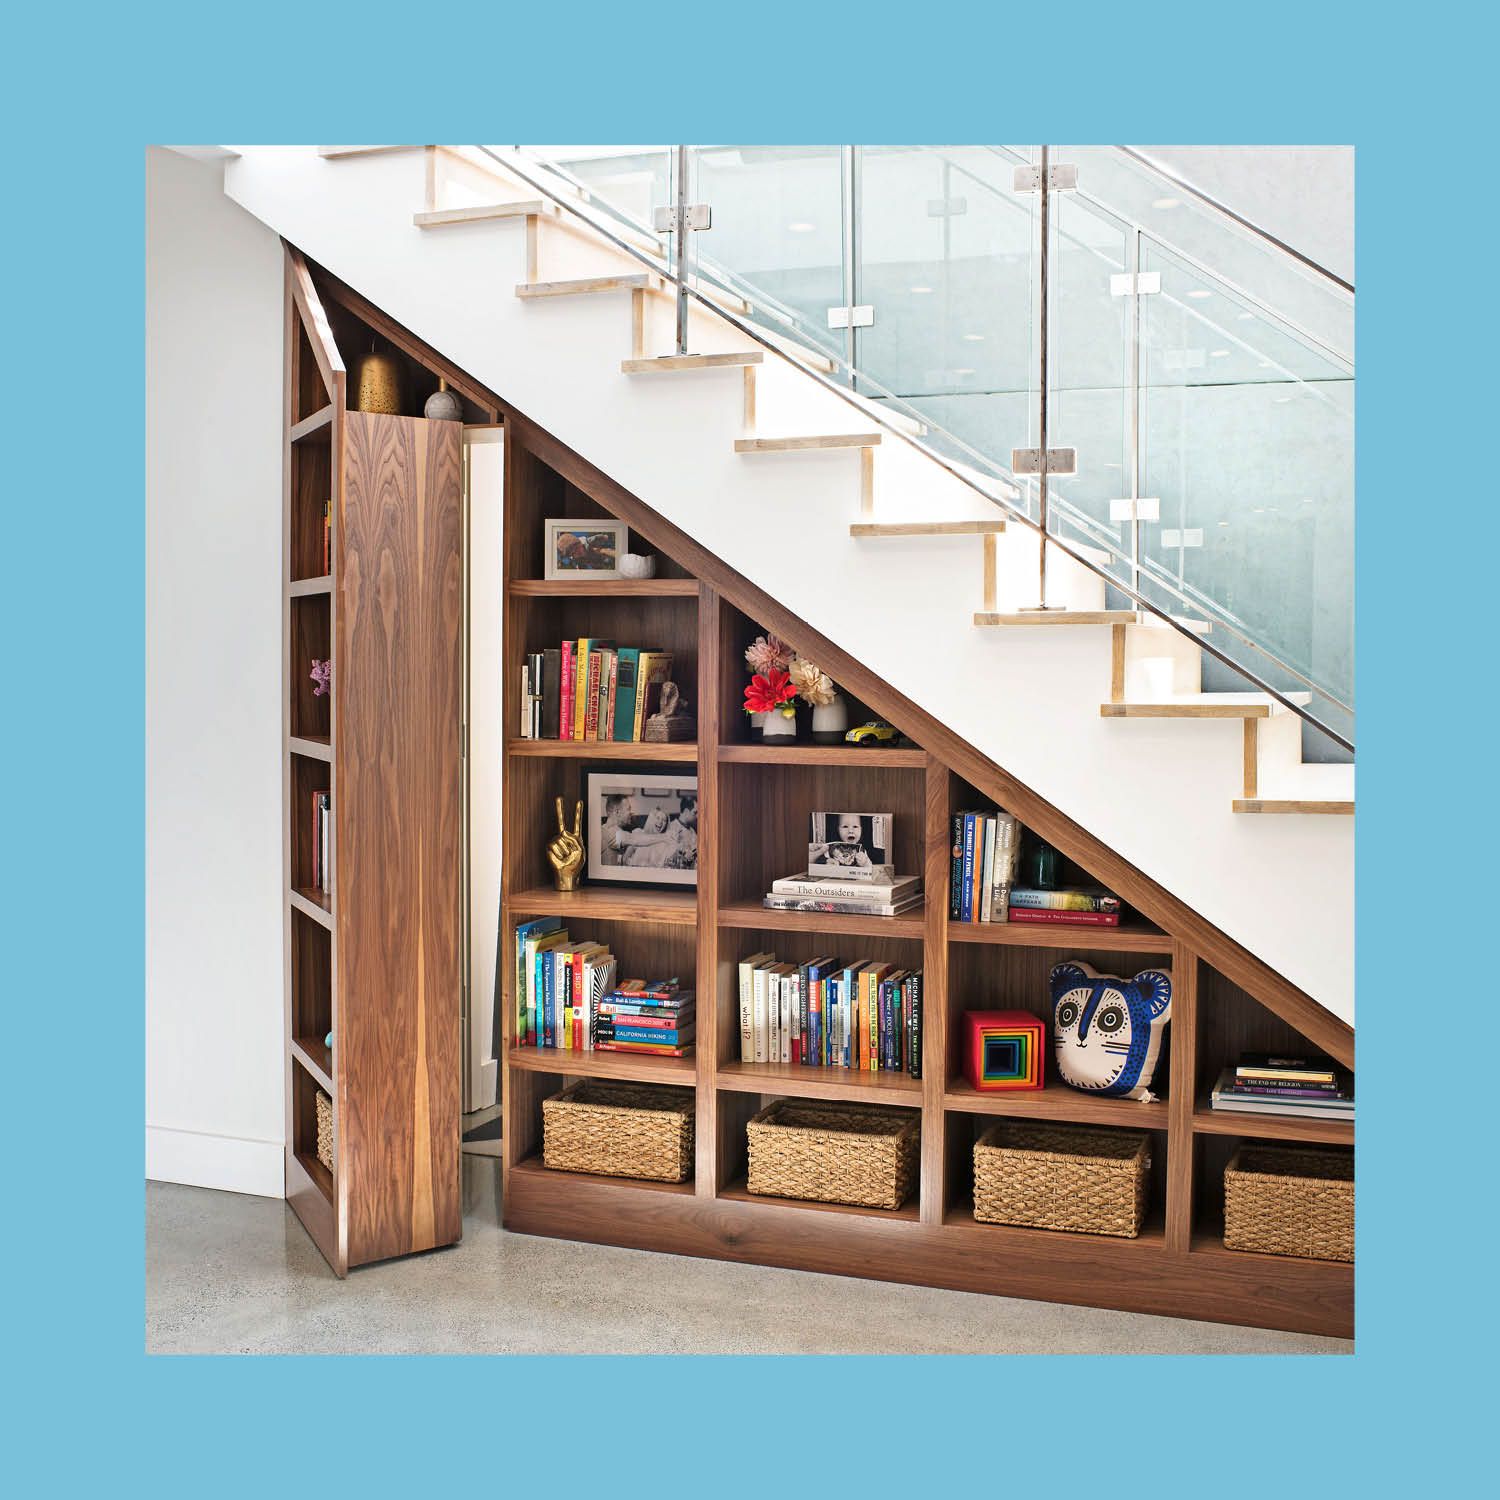 Shelf, Shelving, Stairs, Furniture, Bookcase, Room, Building, Interior design, Wood, Architecture, 